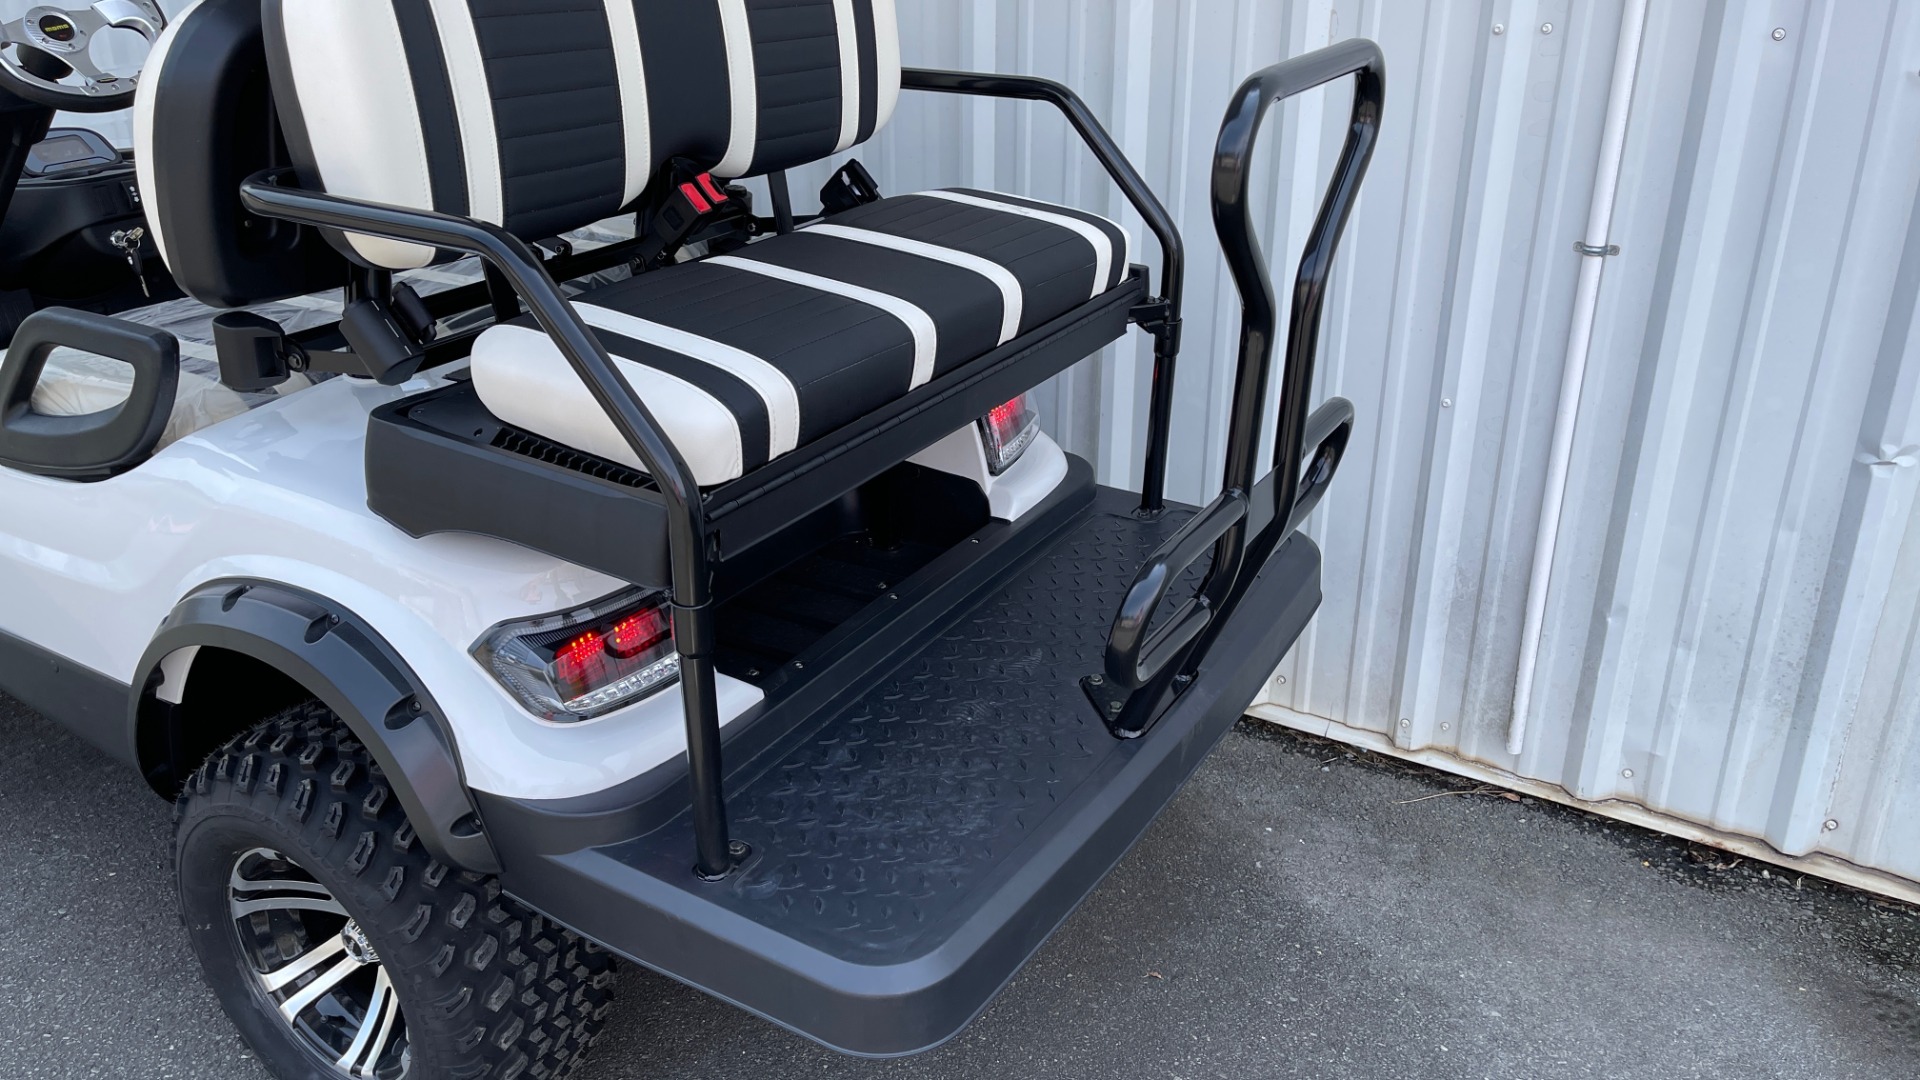 Used 2021 ICON i40L LIFTED ELECTRIC CAR / 4-PASSENGER GOLF CART / 25MPH / NEW / 1-MILE for sale Sold at Formula Imports in Charlotte NC 28227 7